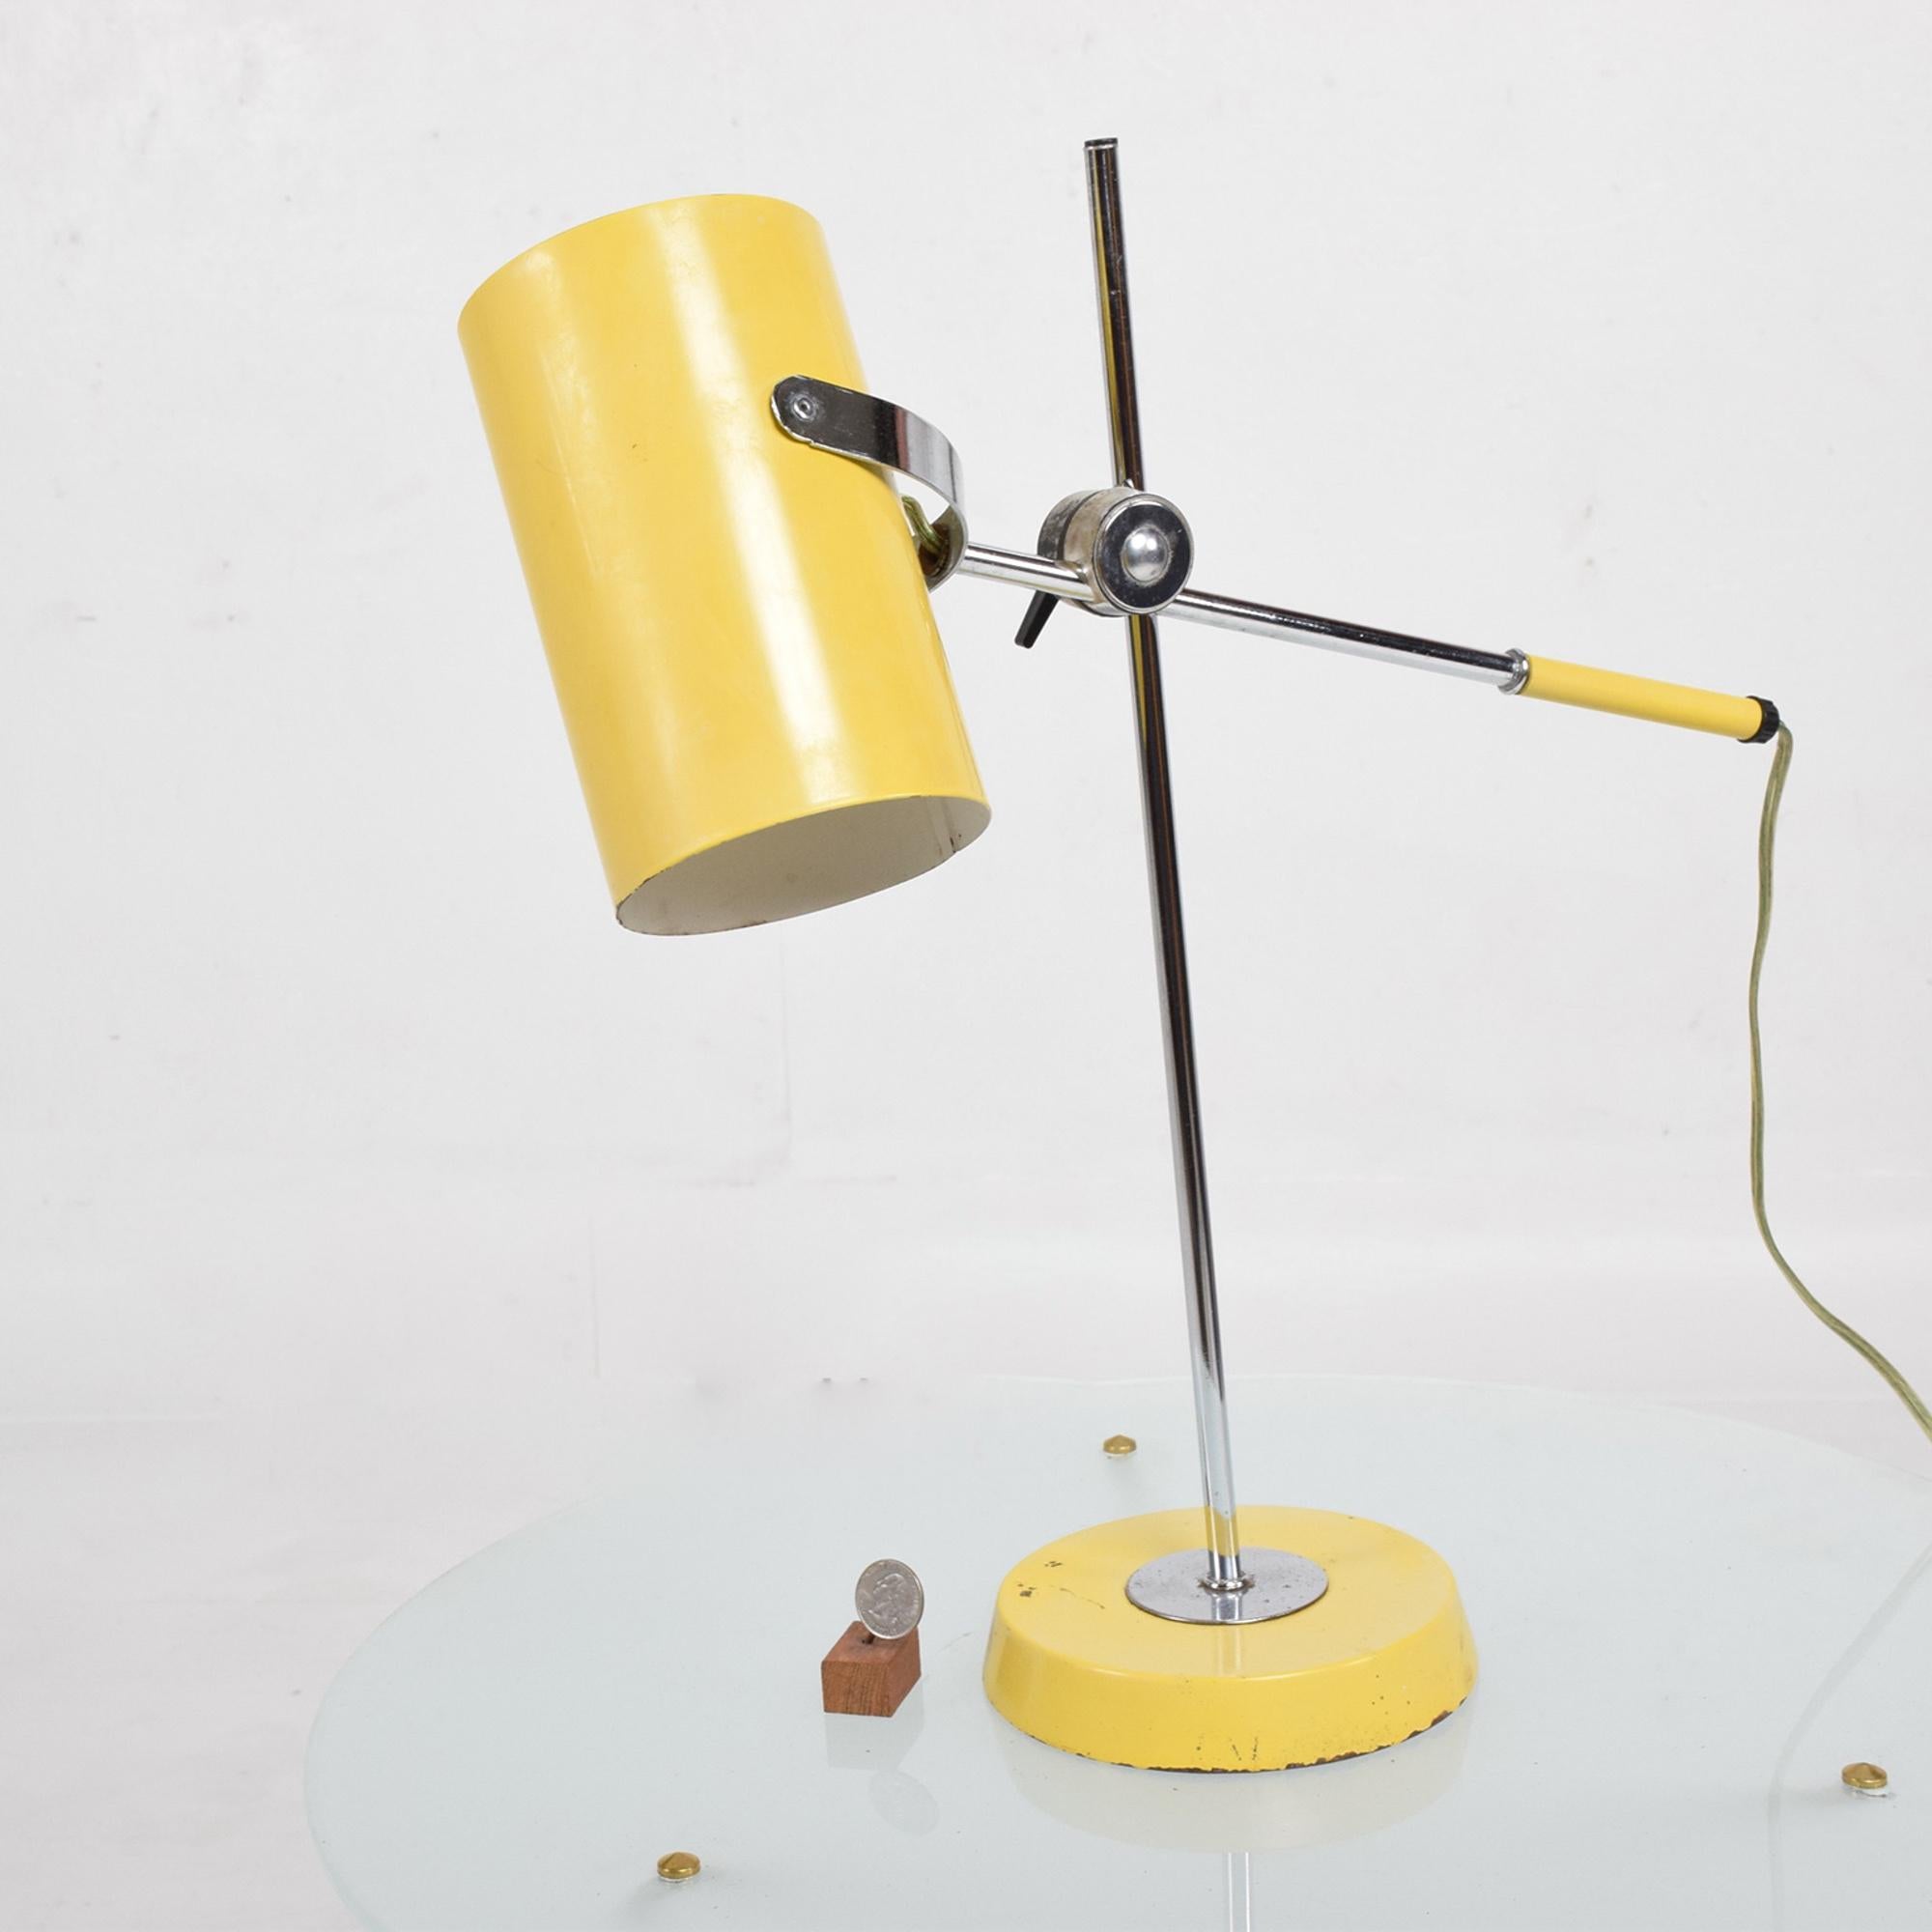 Desk Table Lamp in YELLOW USA circa 1960s.
Style of Greta Grossman, unmarked.
The shade is adjustable. The height is adjustable.
Chrome-plated body with metal or aluminum painted in yellow.
Measures: 20 tall x 17 D x 5.5 W
Shade is 4 in diameter x